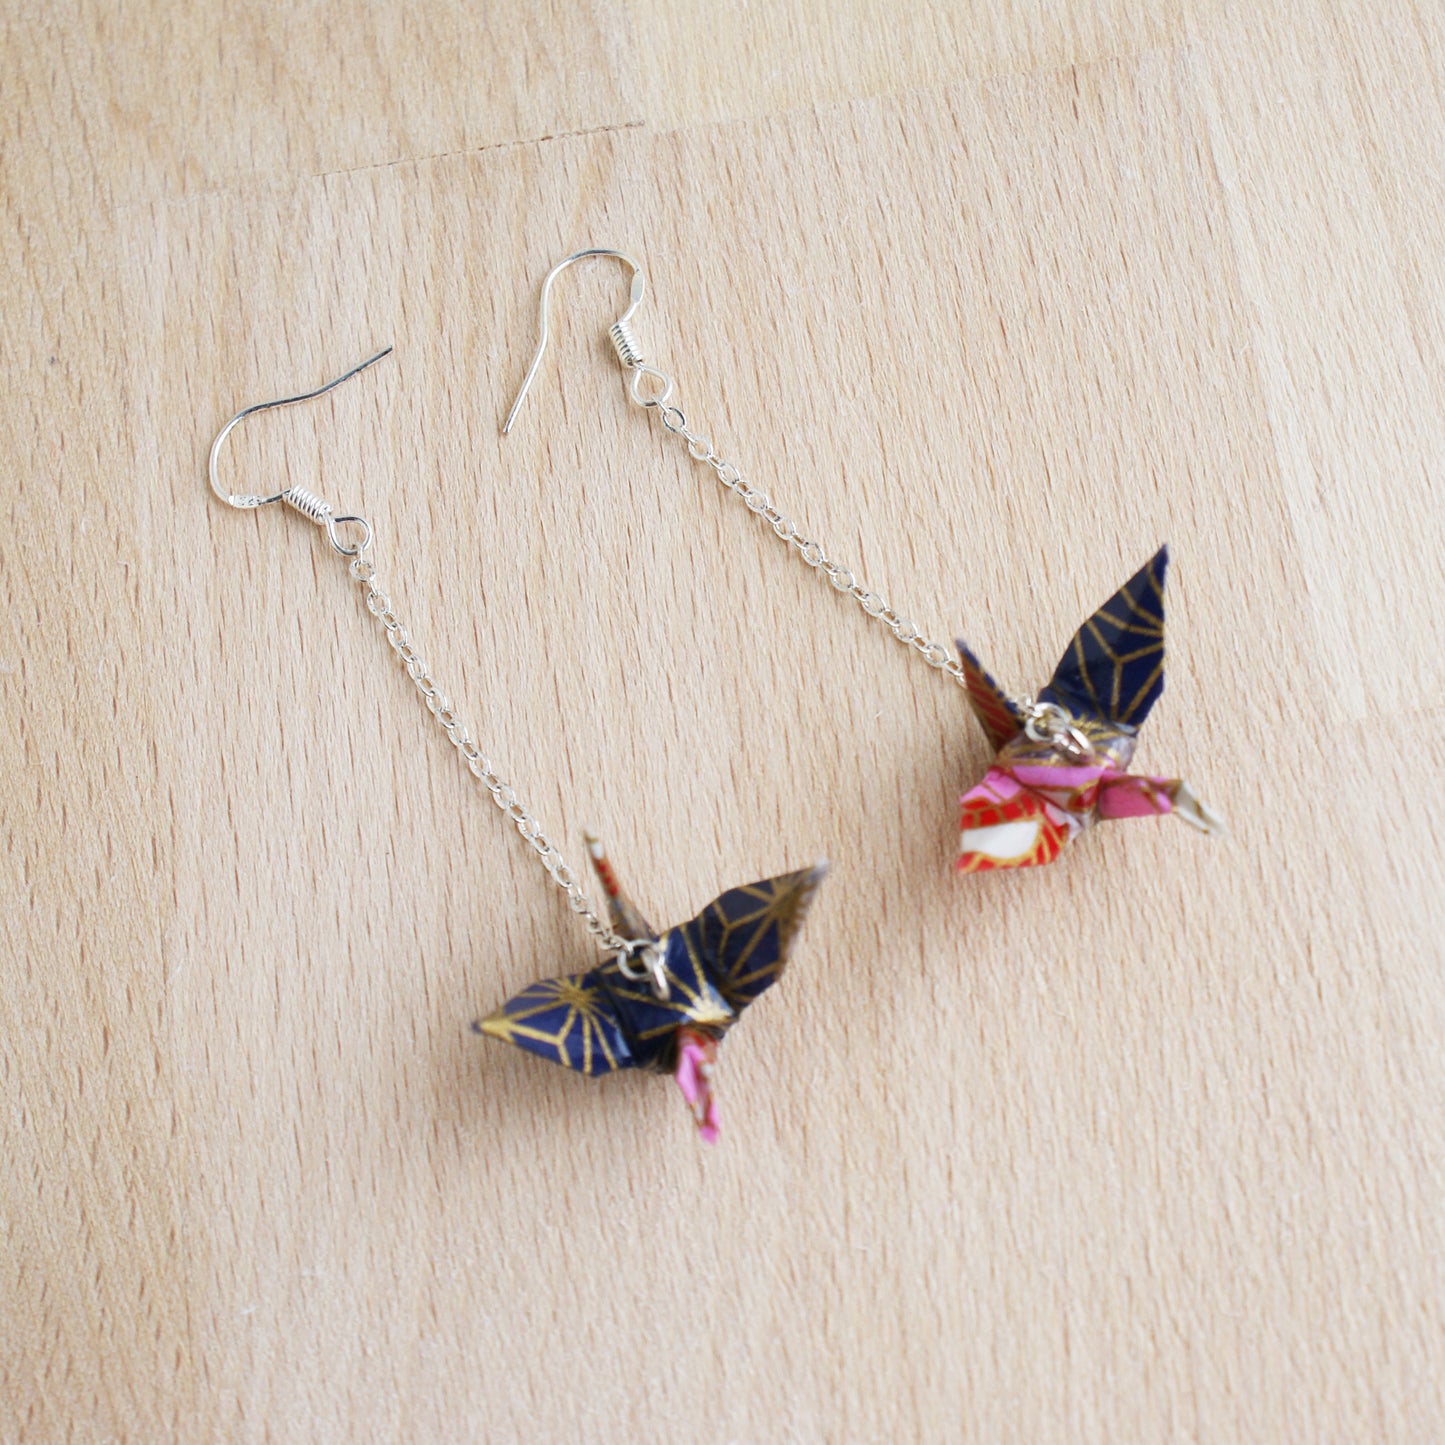 Japanese Origami Paper Crane Sterling Silver Earrings - Navy Red